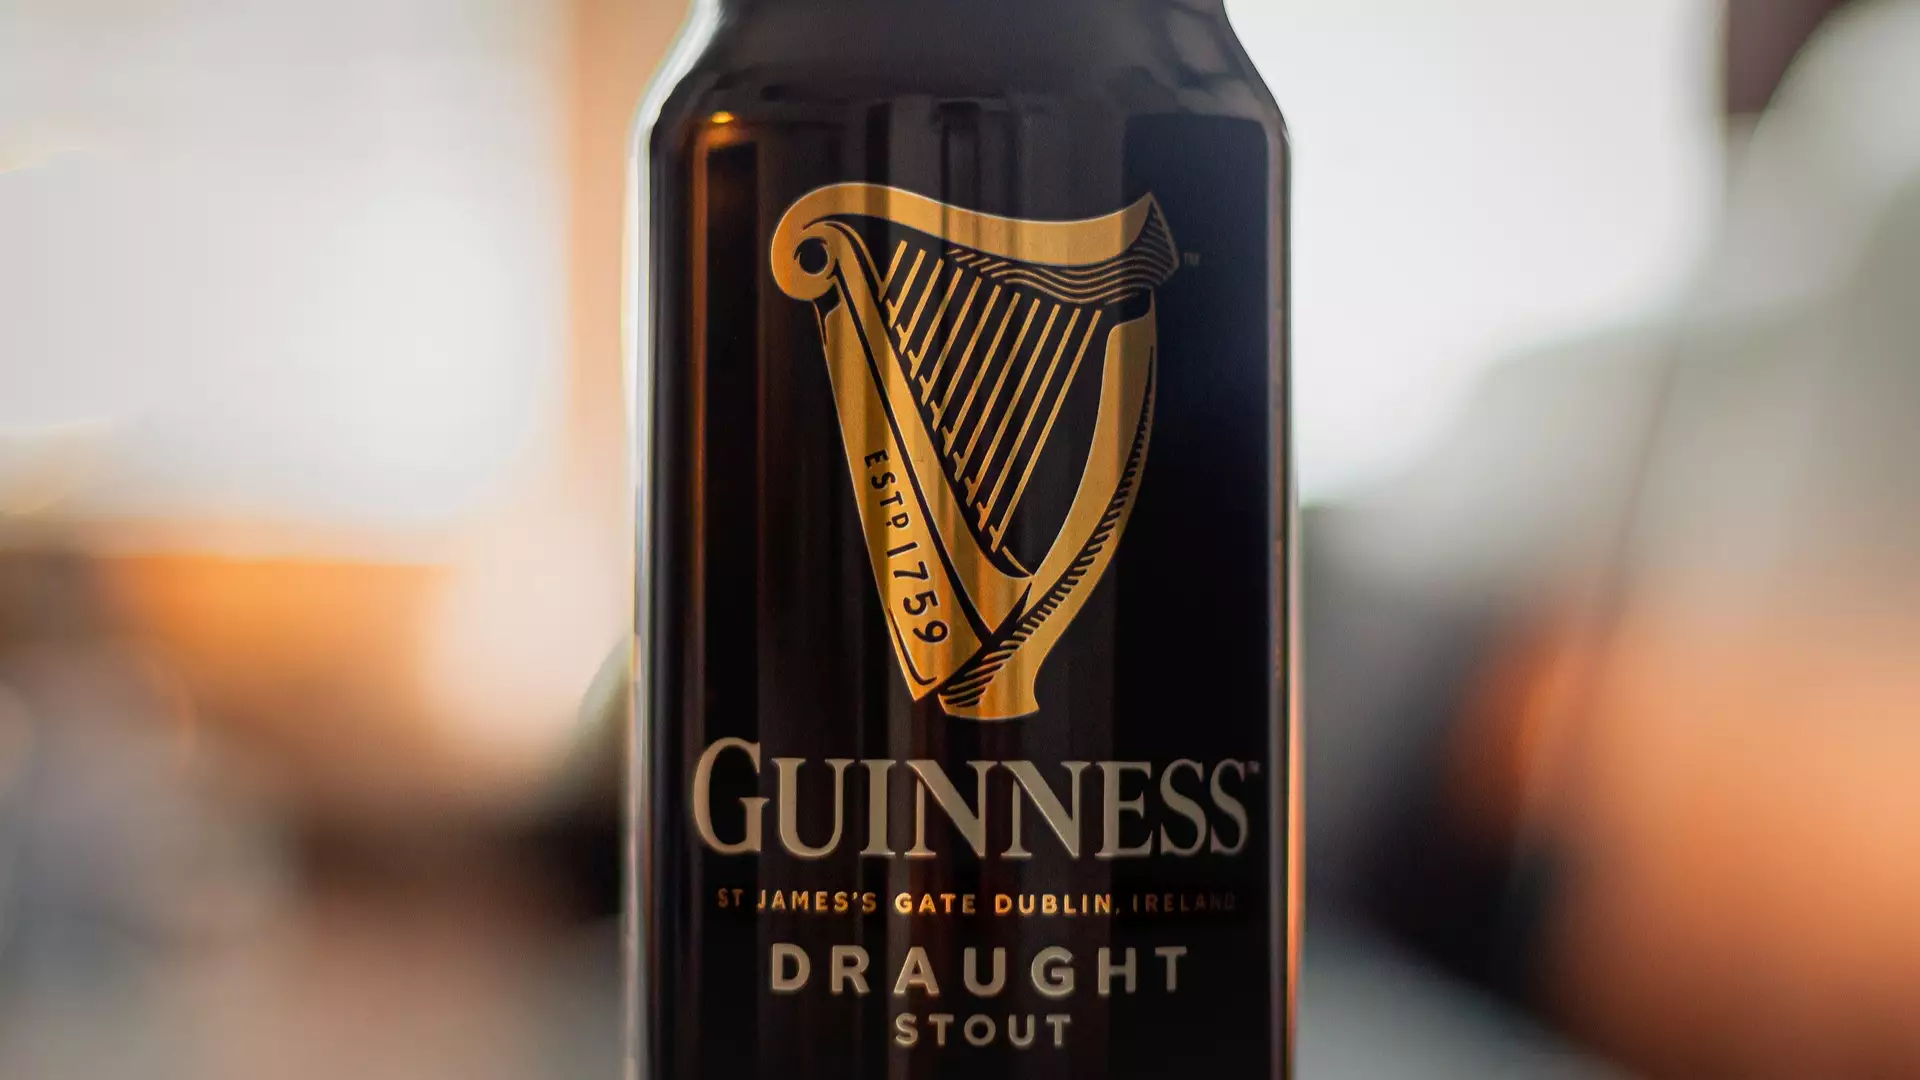 Guinness Widget Once Won Award For Technological Achievement – Beating The Internet